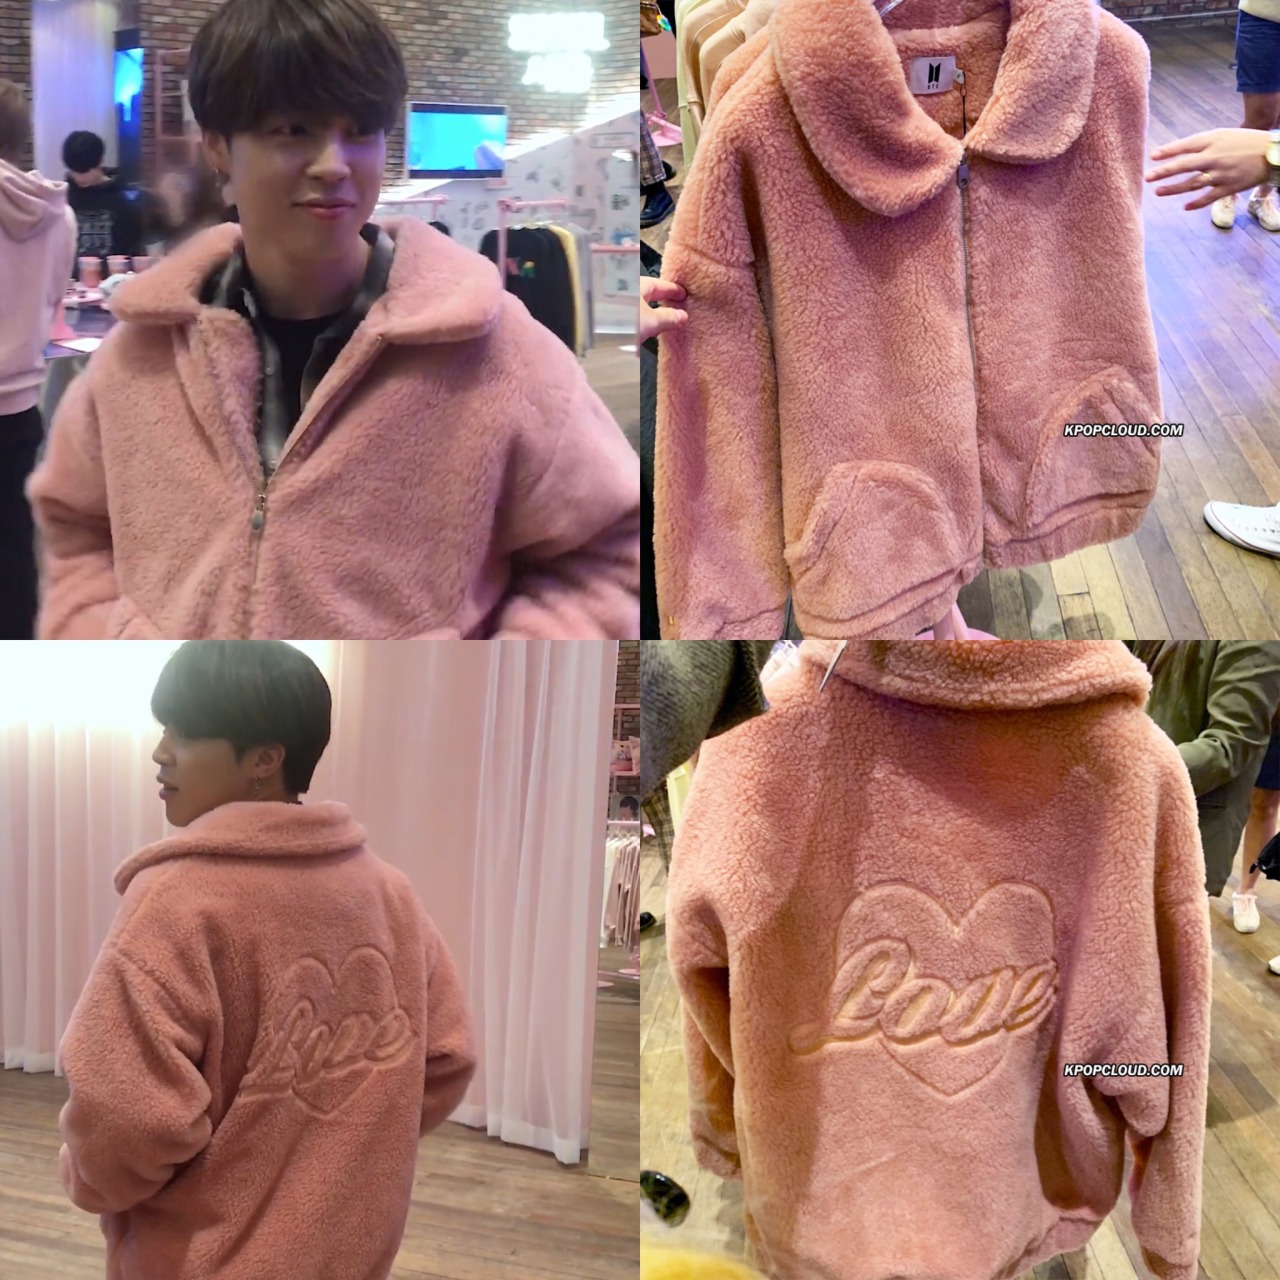 💖BTS OFFICIAL “HOUSE OF BTS” MERCH💖 Get yours at...